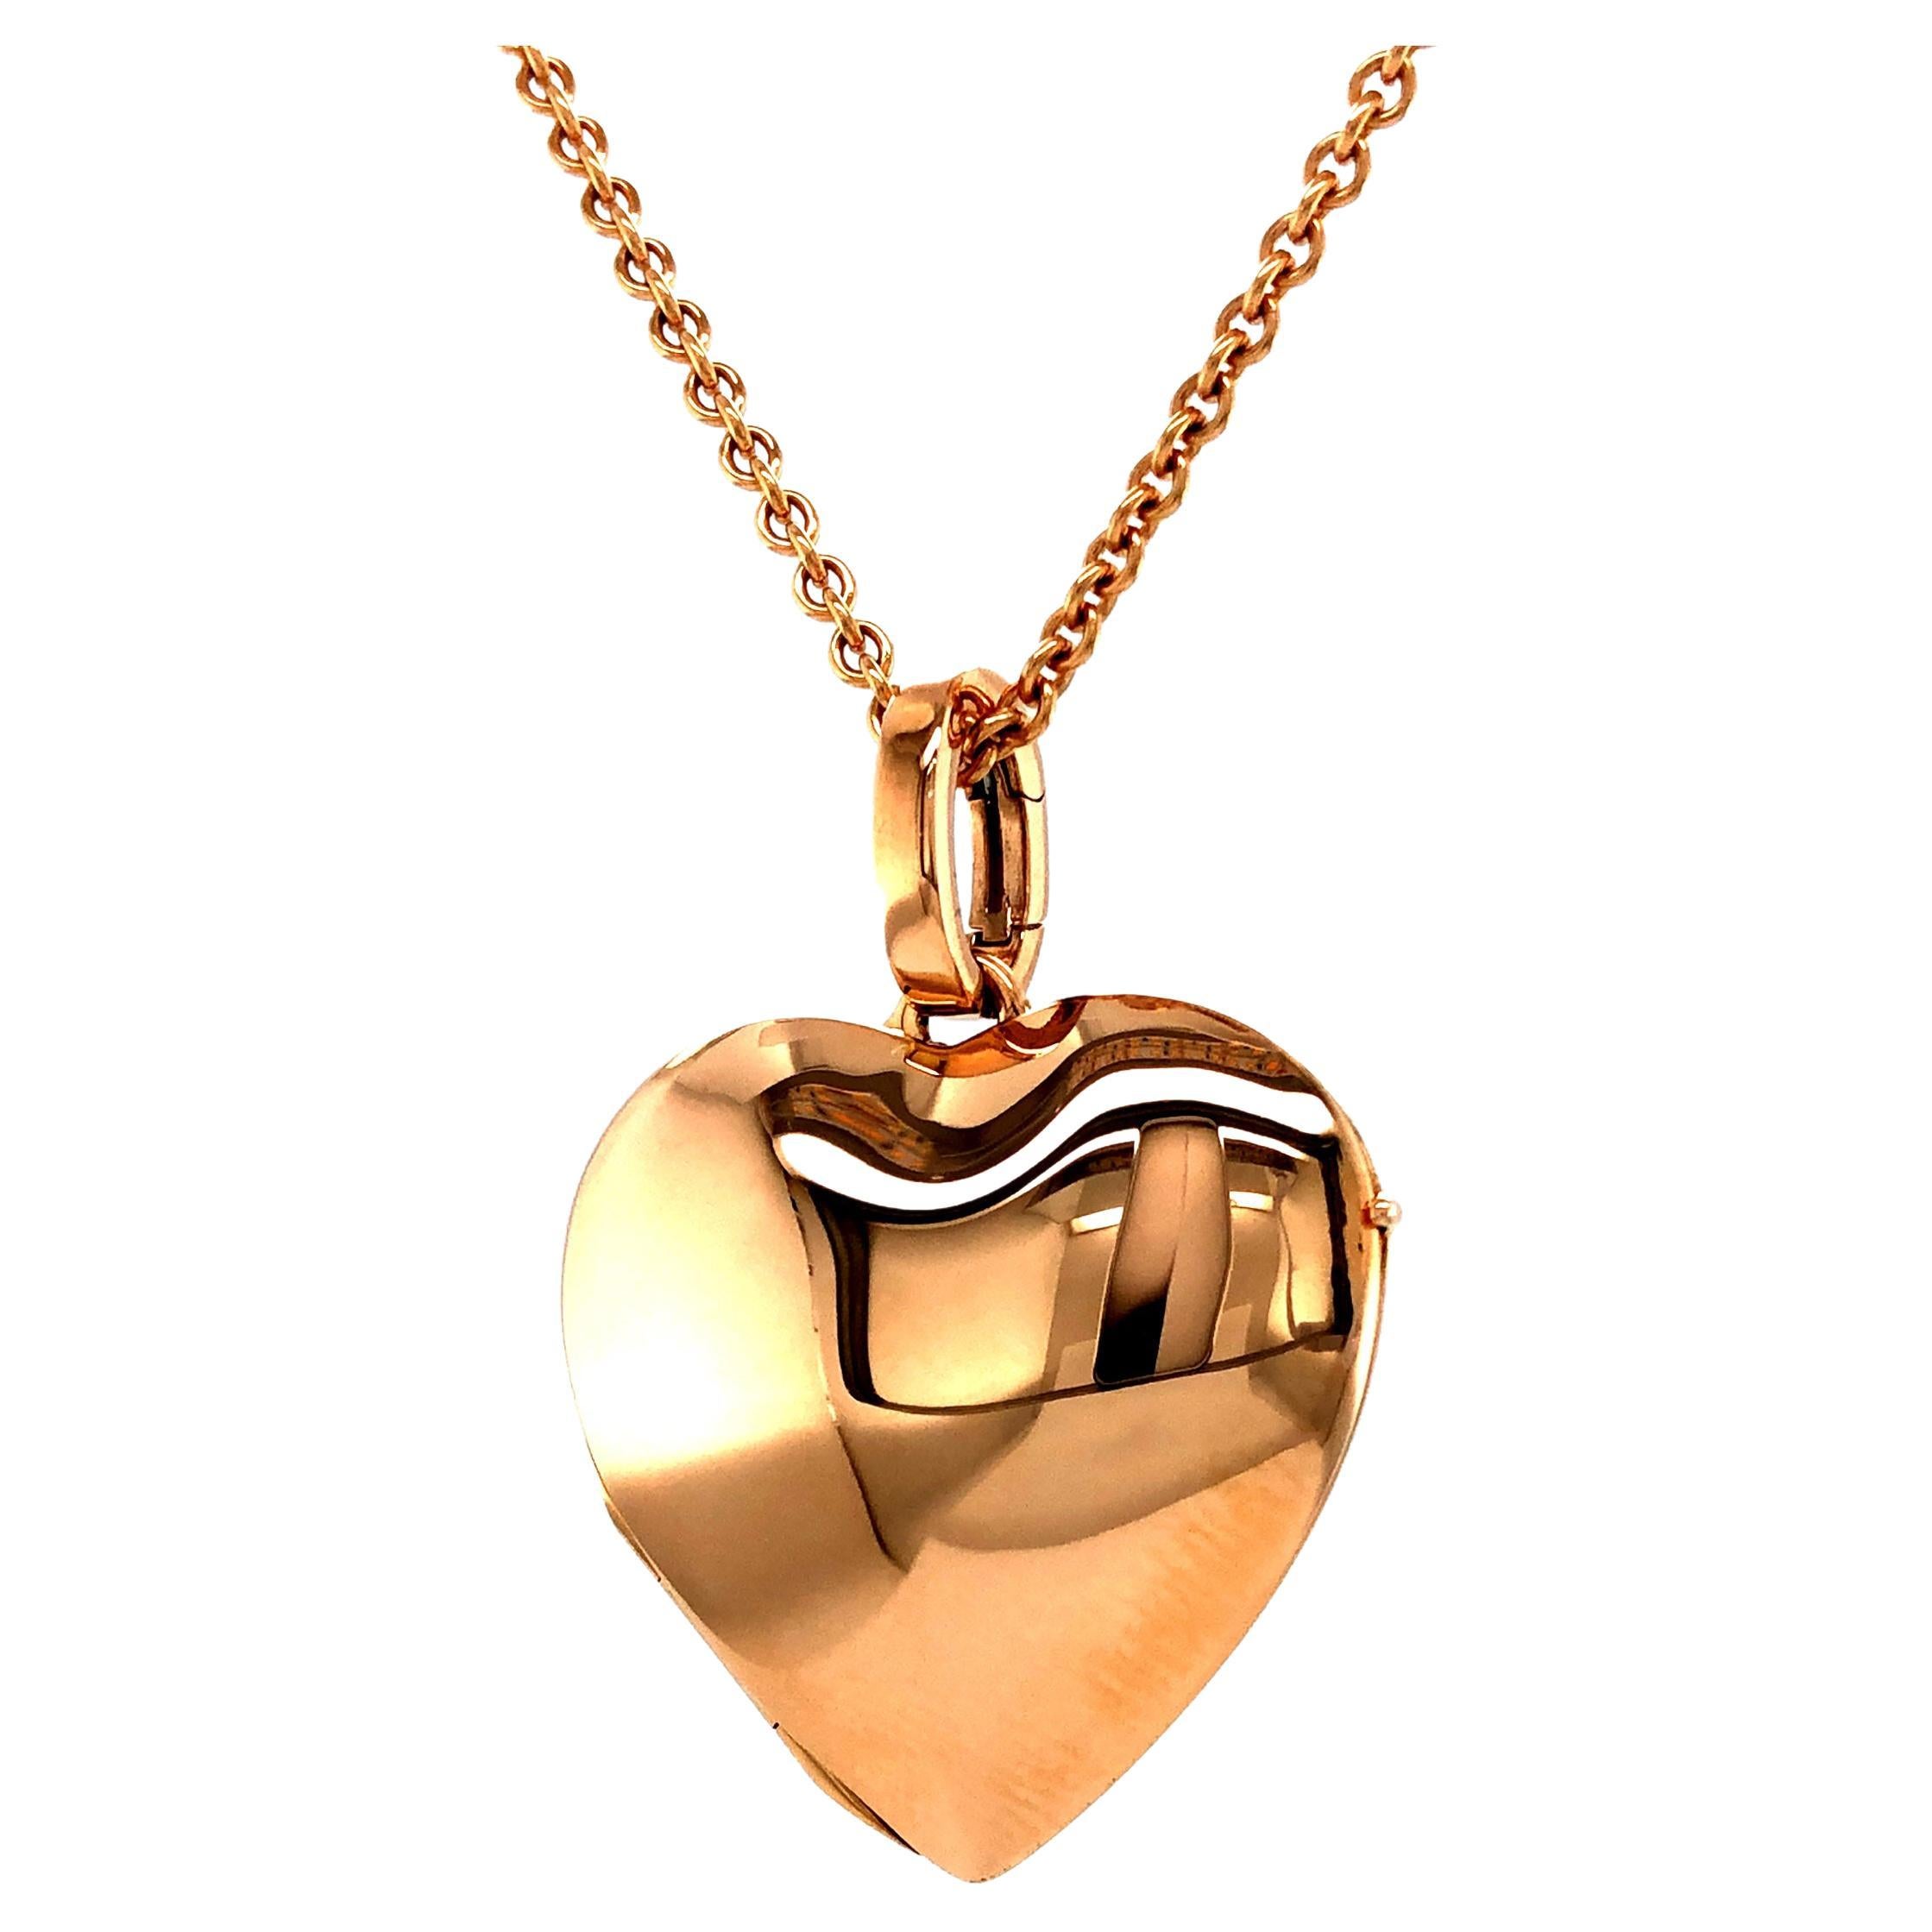 Customizable Heart Shaped Polished Pendant Locket 18k Rose Gold 25 mm x 25 mm For Sale